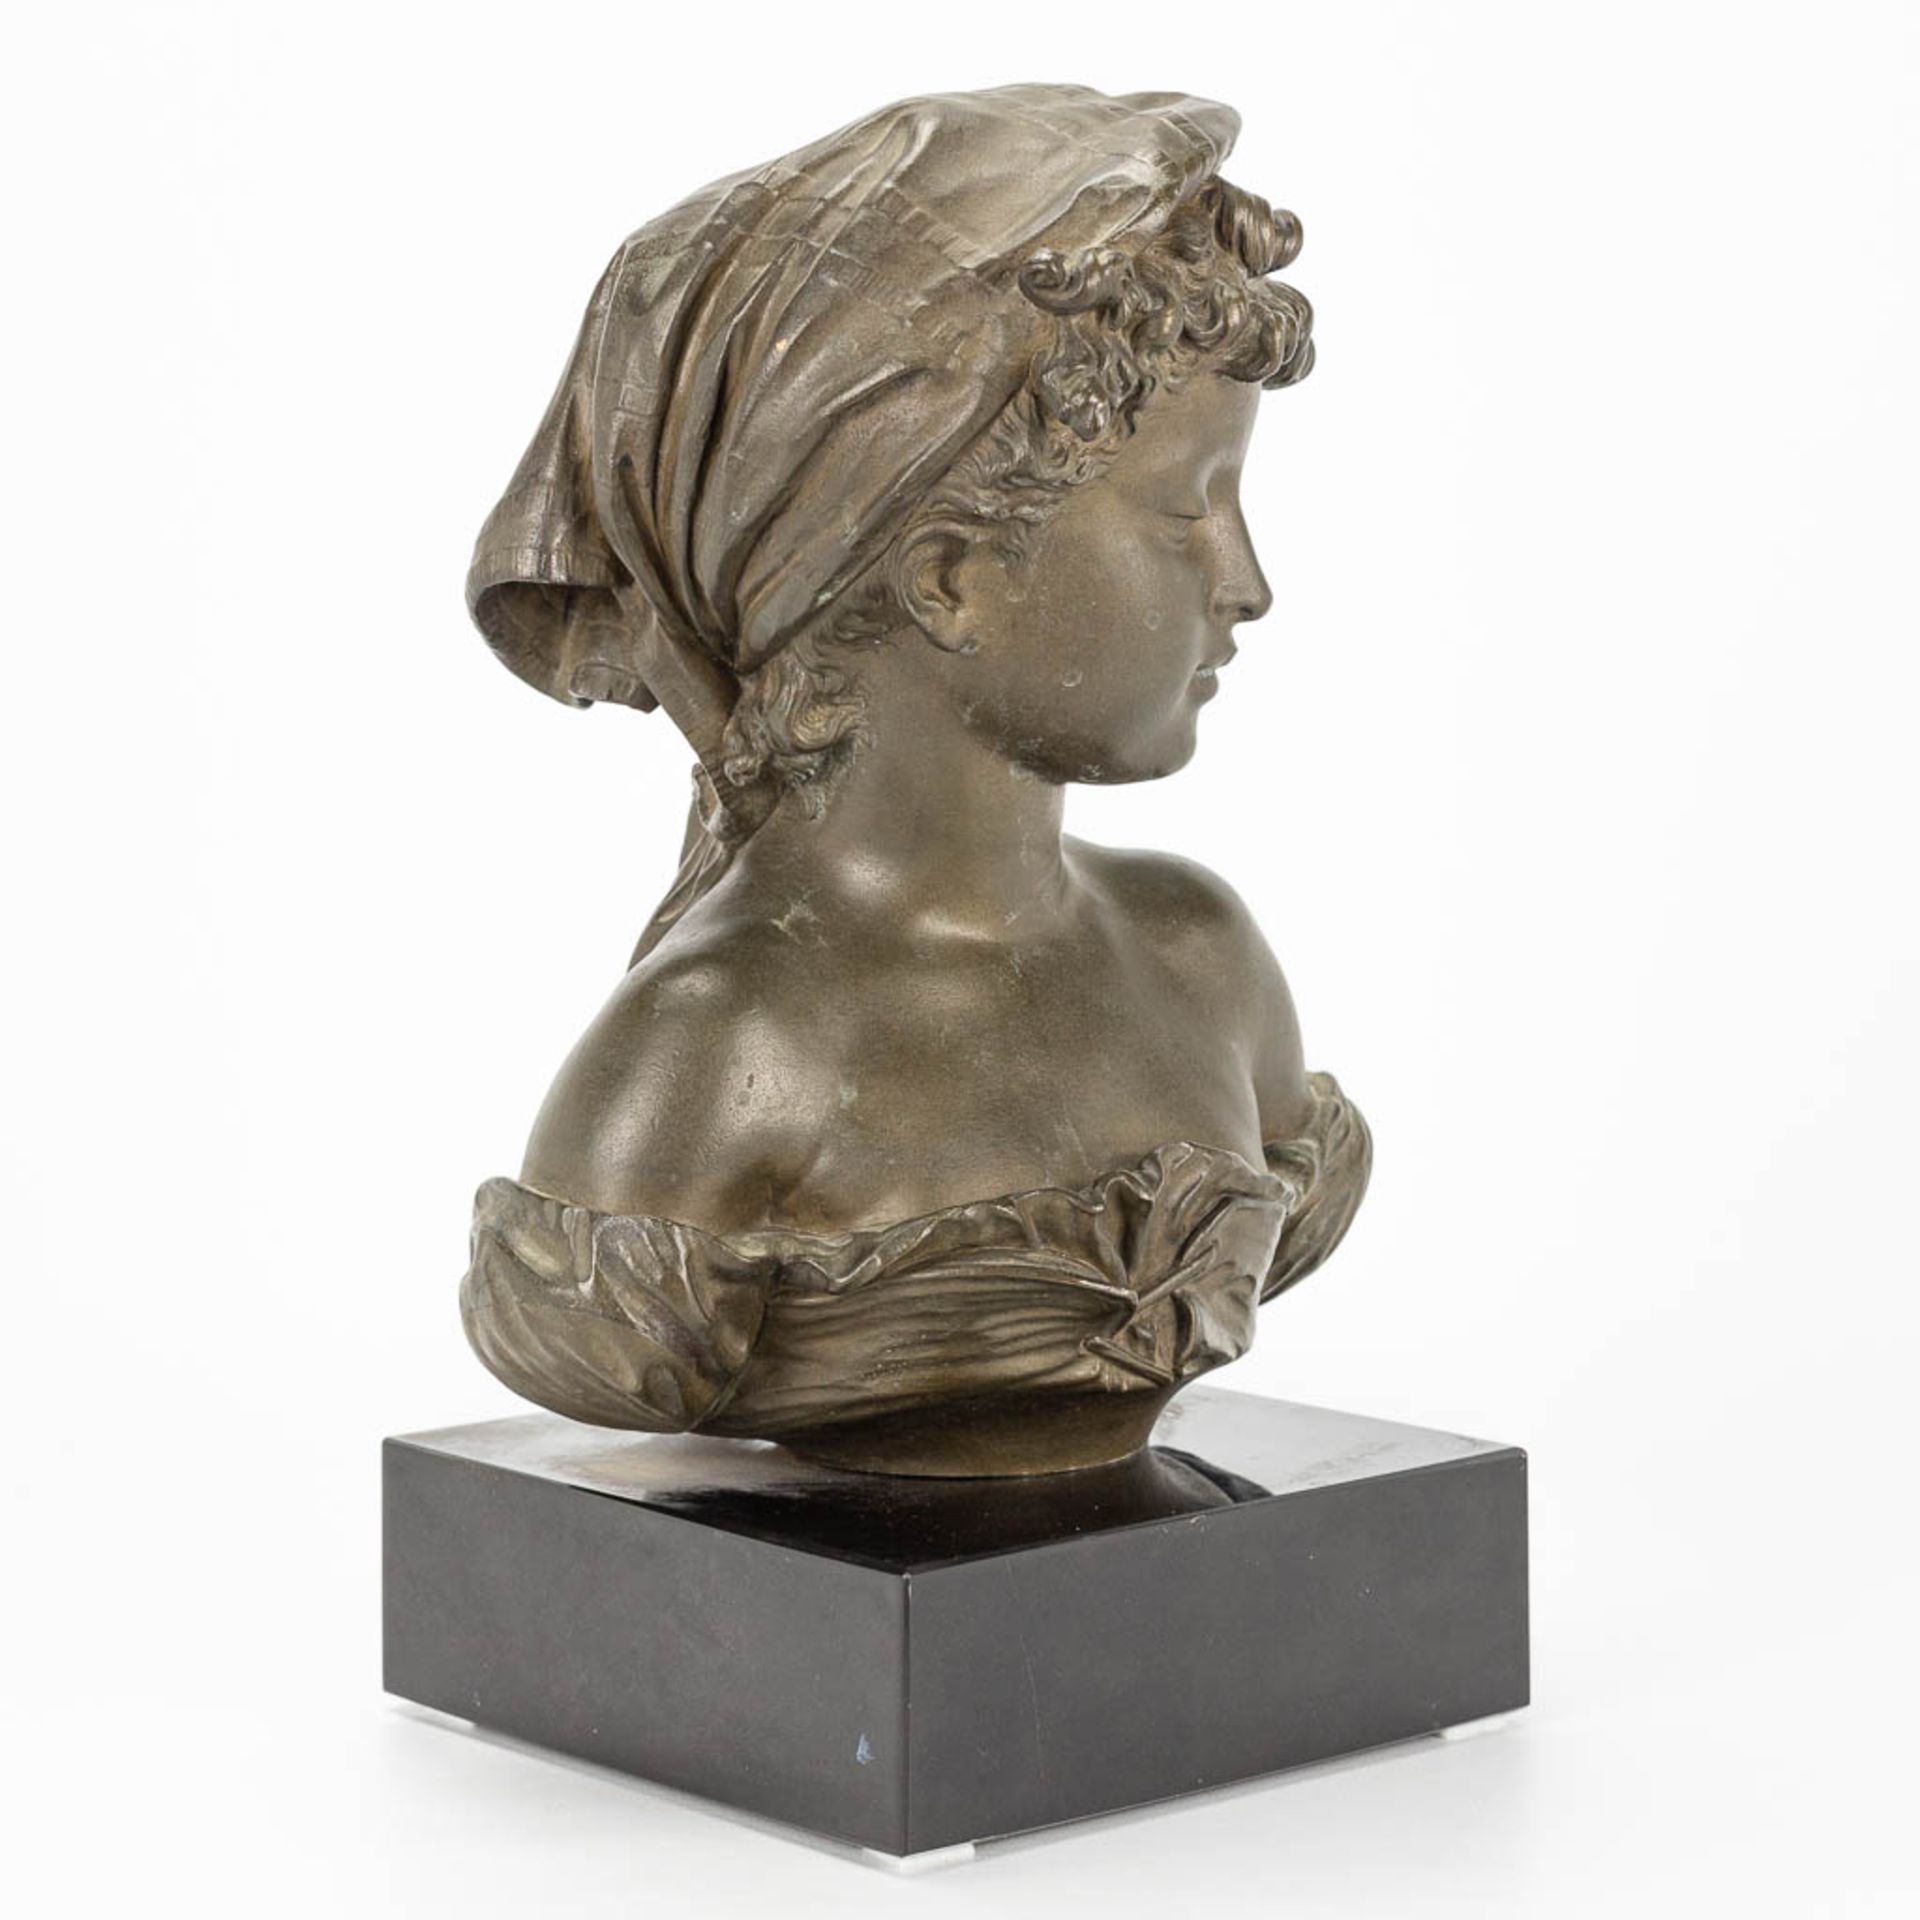 A bust of a young lady, made of bronze and marked Compagnie des bronzes, Bruxelles. - Image 6 of 11